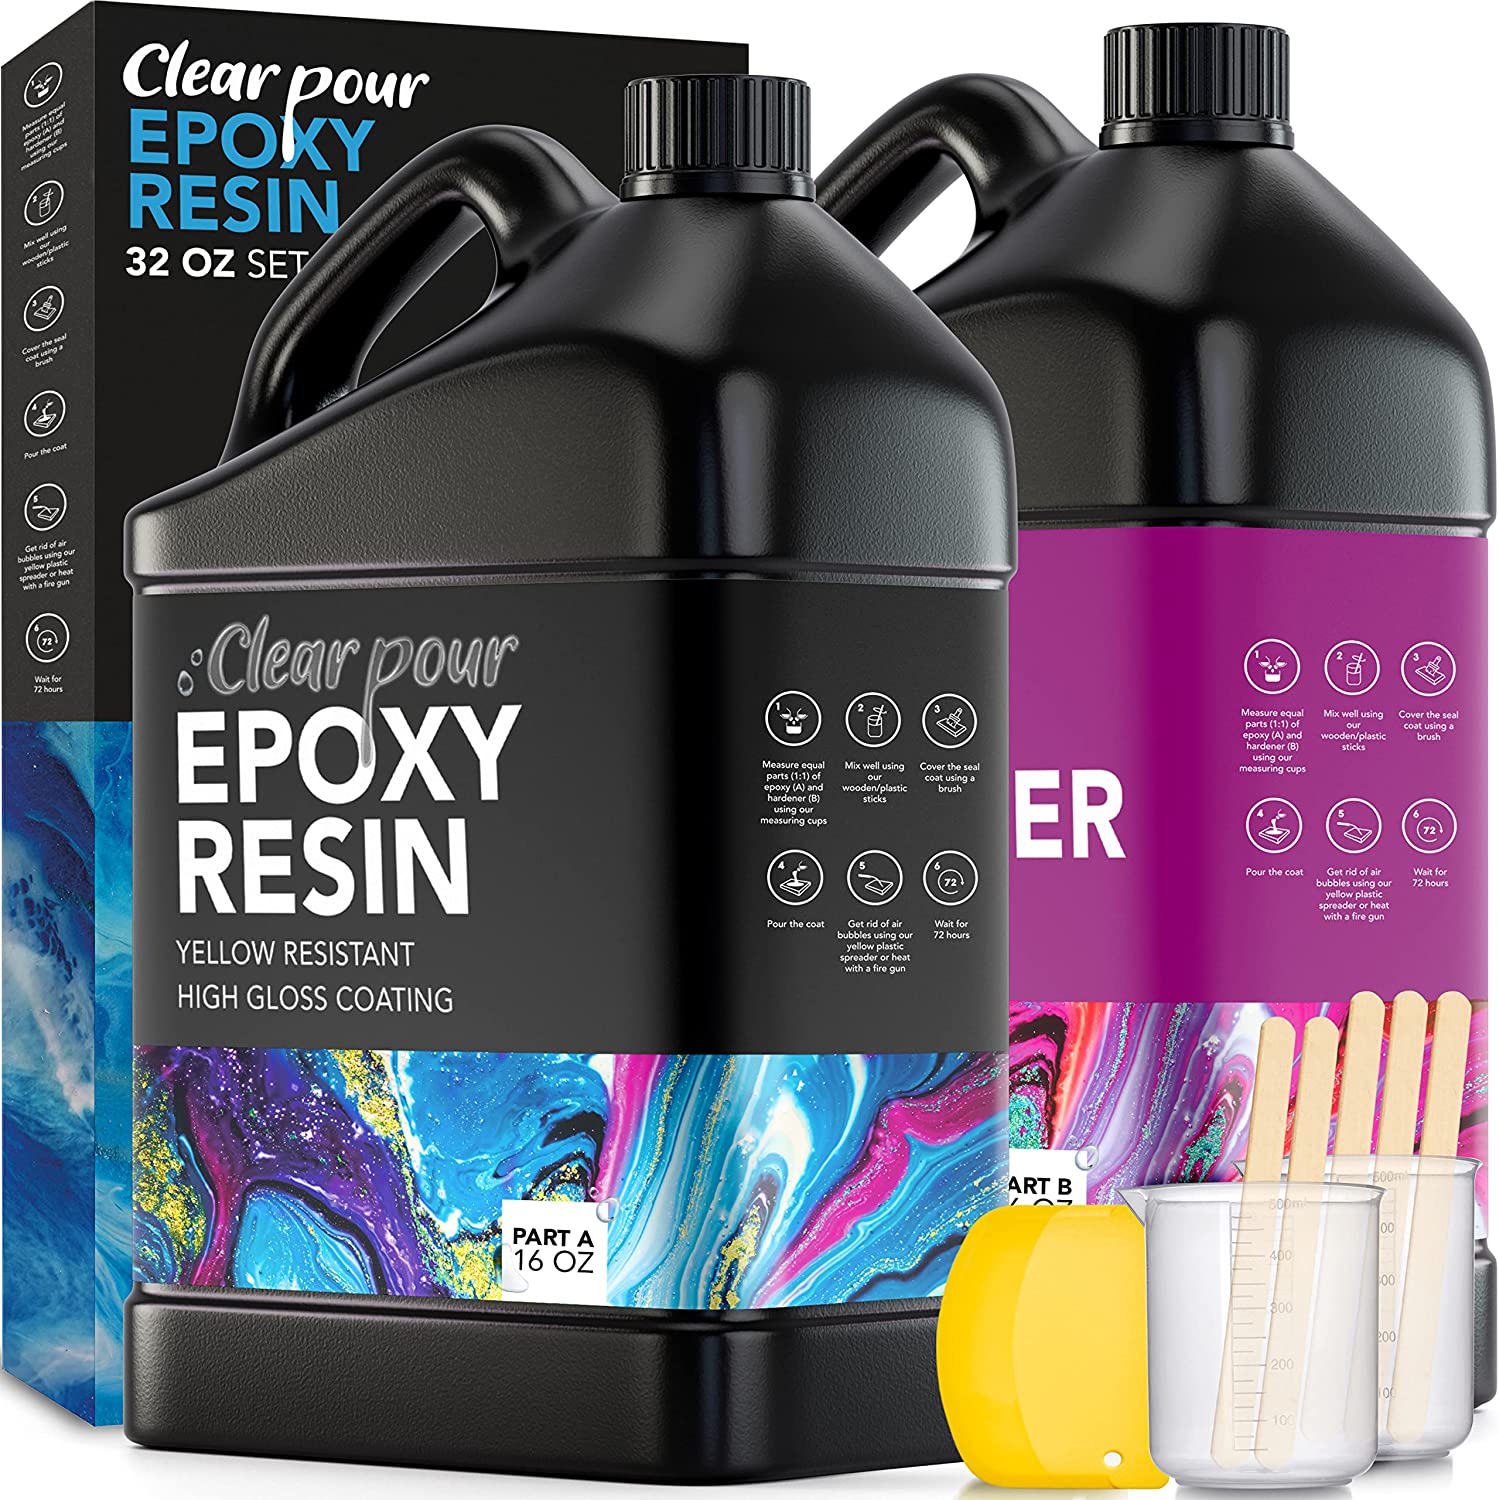 Clear Pour 32oz Epoxy Resin Kit - Premium Crystal Clear Epoxy Resin Kit - Art Resin, Craft, Jewelry Casting, DIY, Tumblers, Wood & Resin Molds